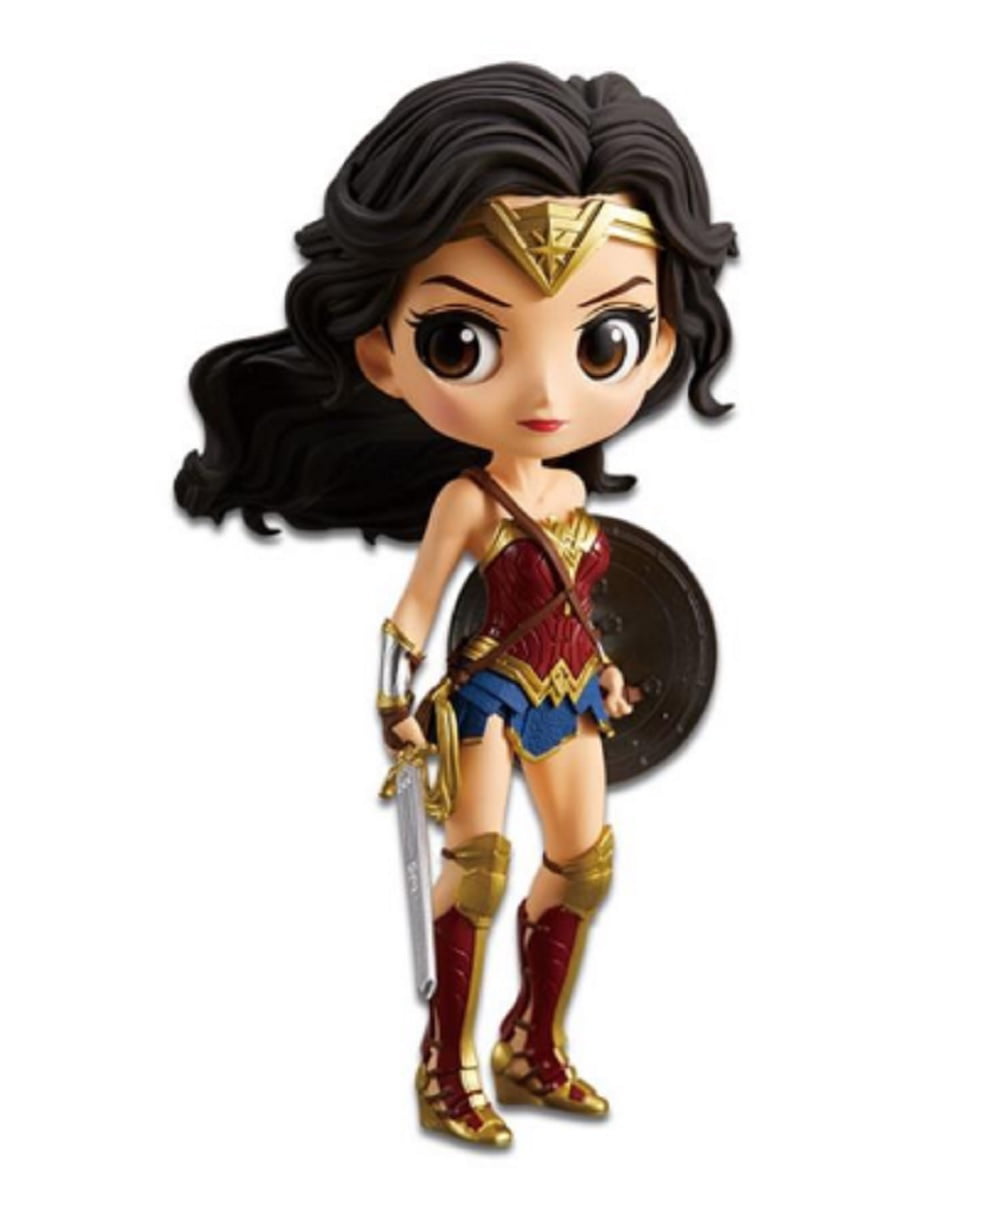 Wonder Woman Q Posket Characters Q Version Action Figure Collectible Model Toy